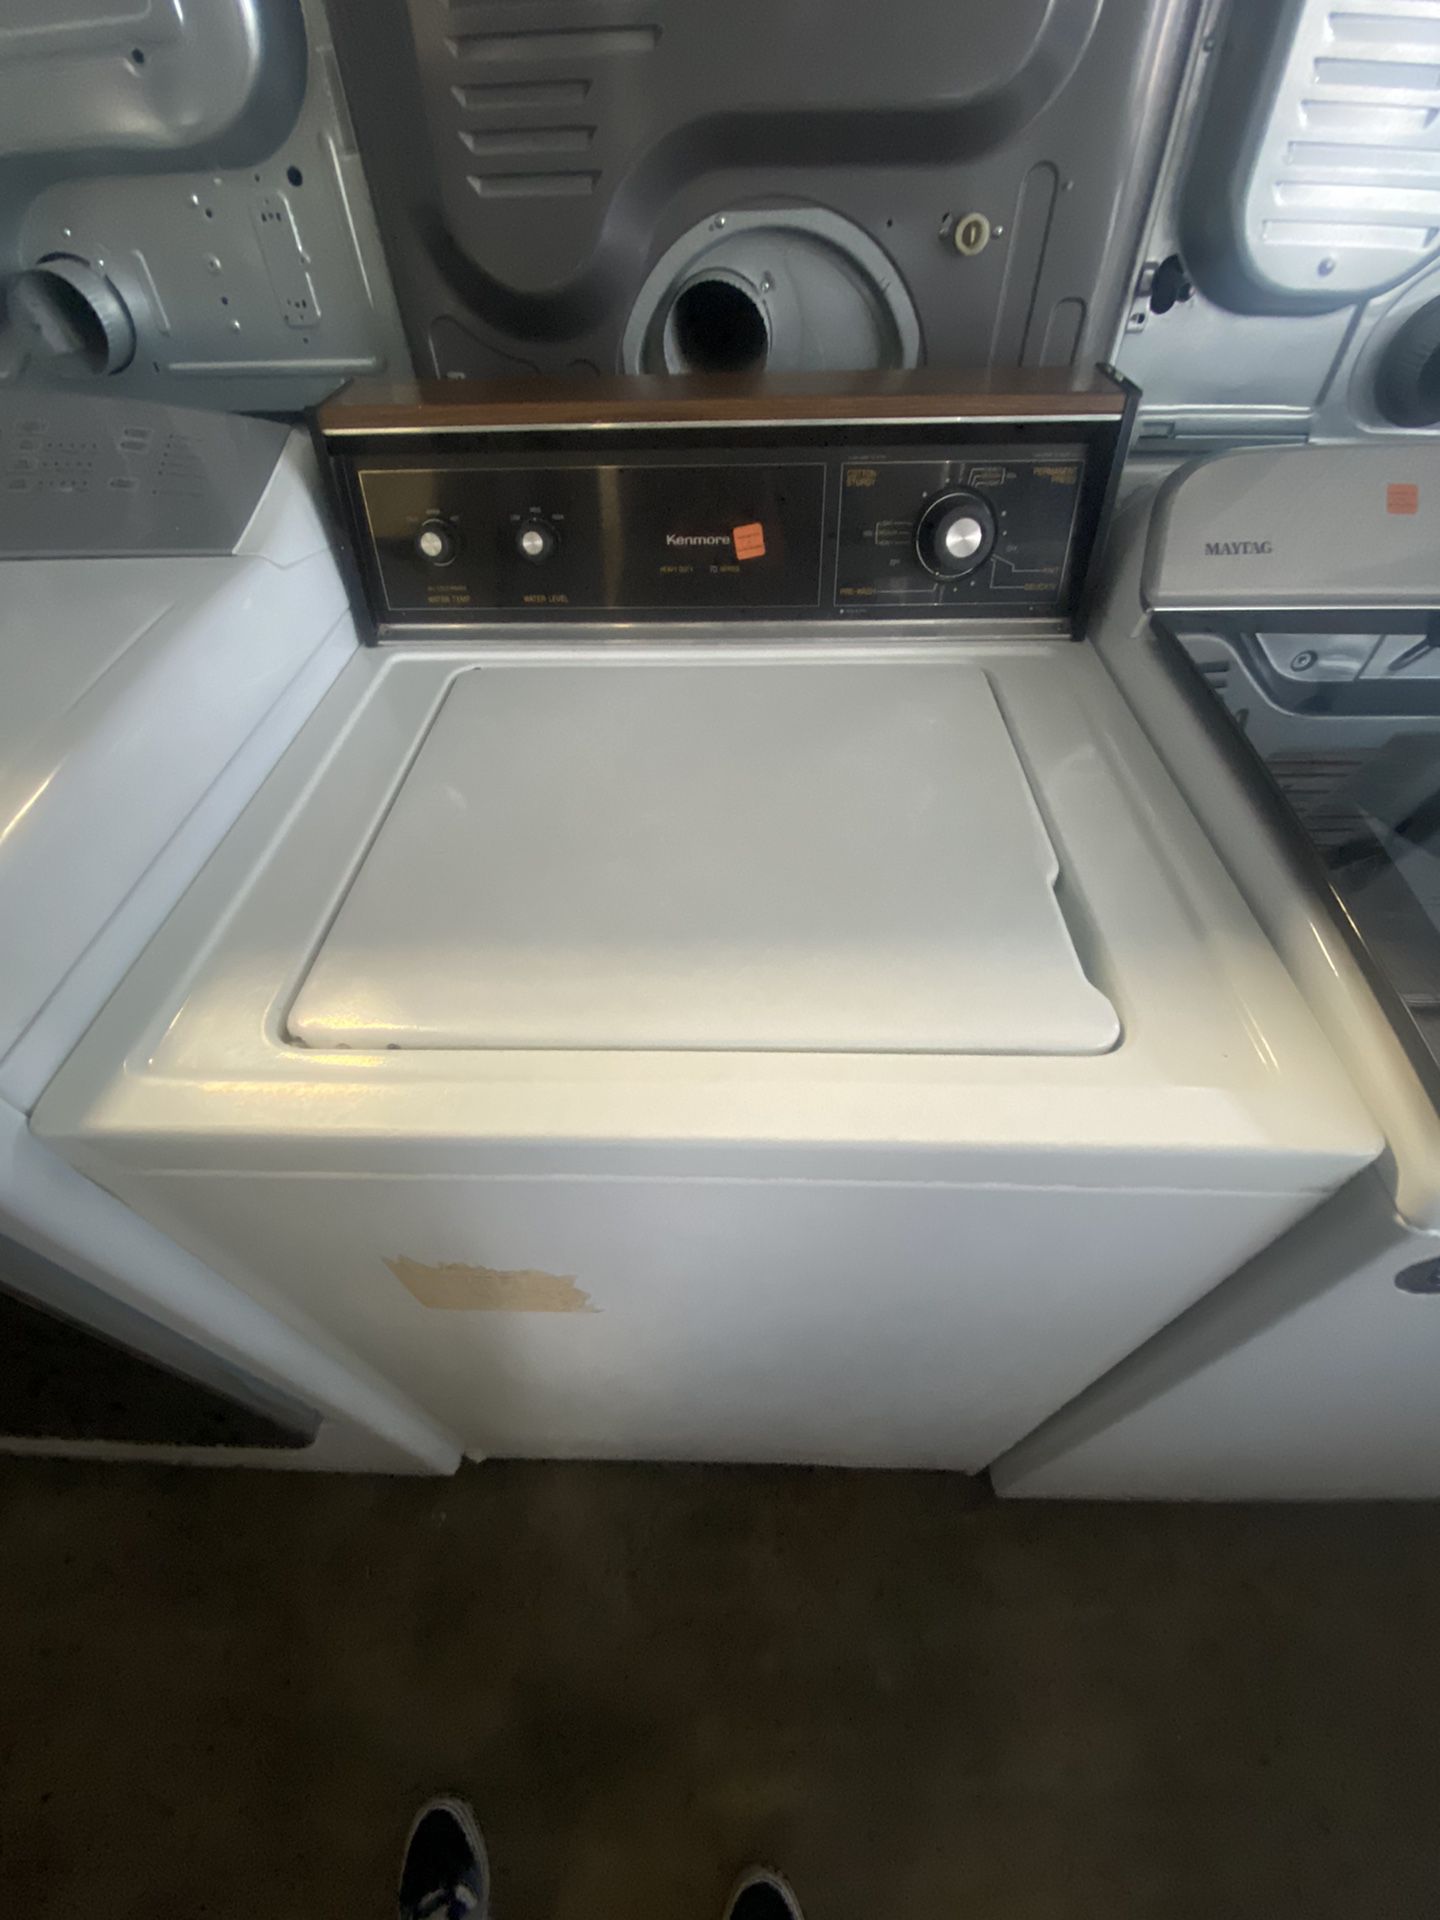 Kenmore Top Load Washer Ready For Pick Up/ Delivery 